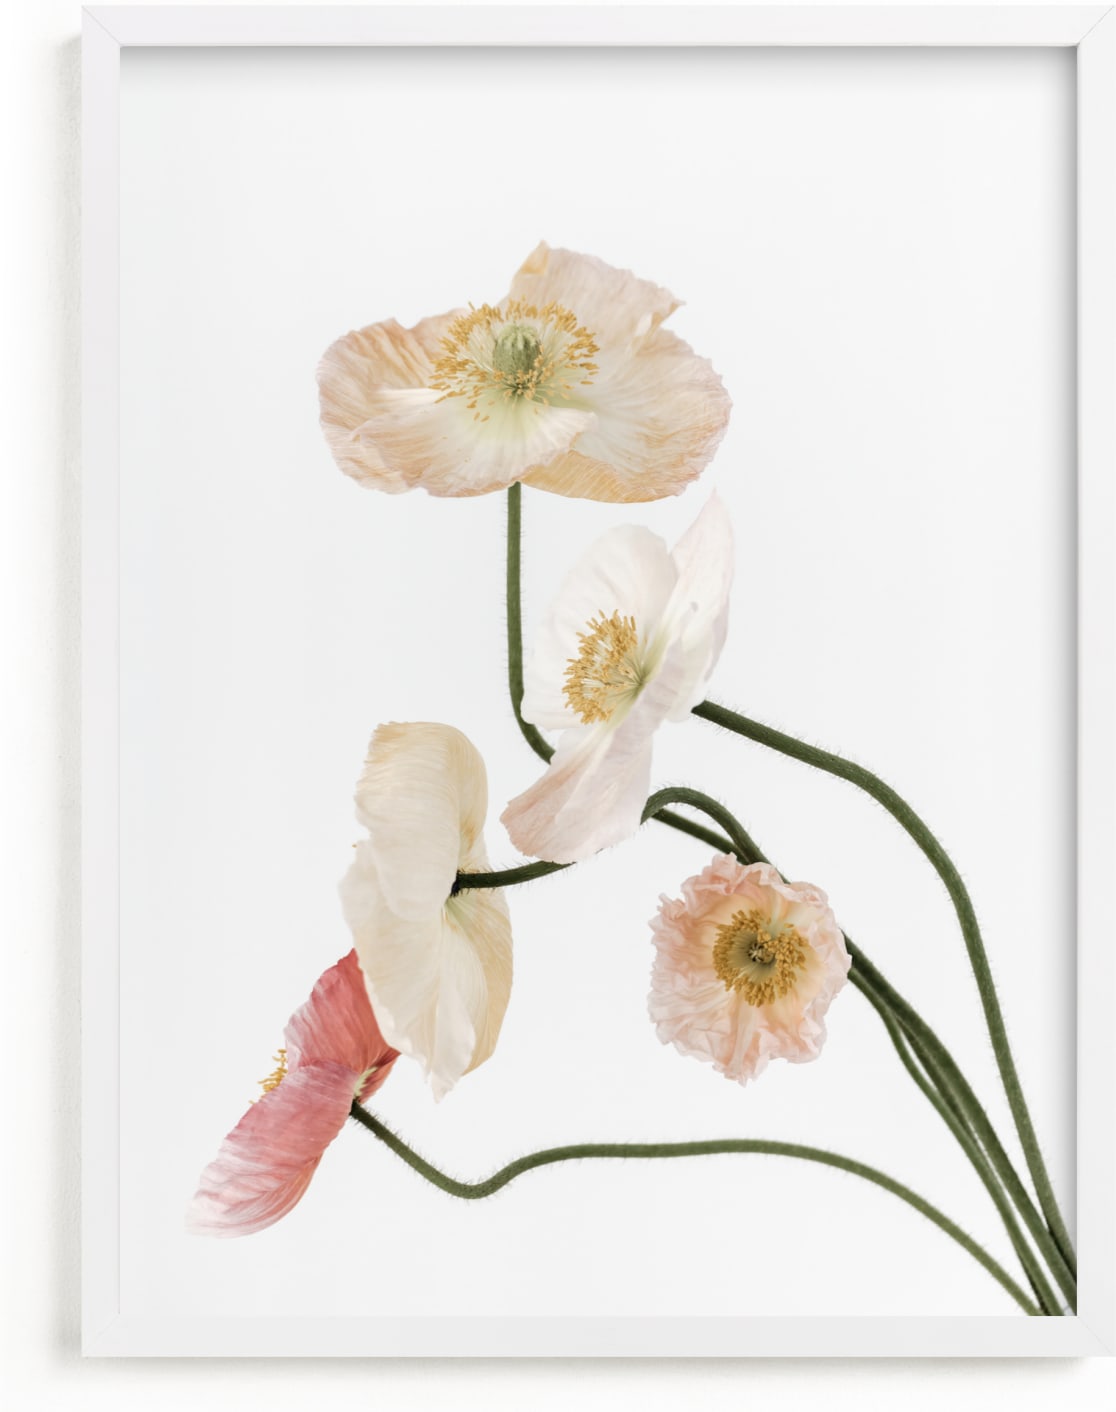 This is a white art by Blustery August called Poppies II.